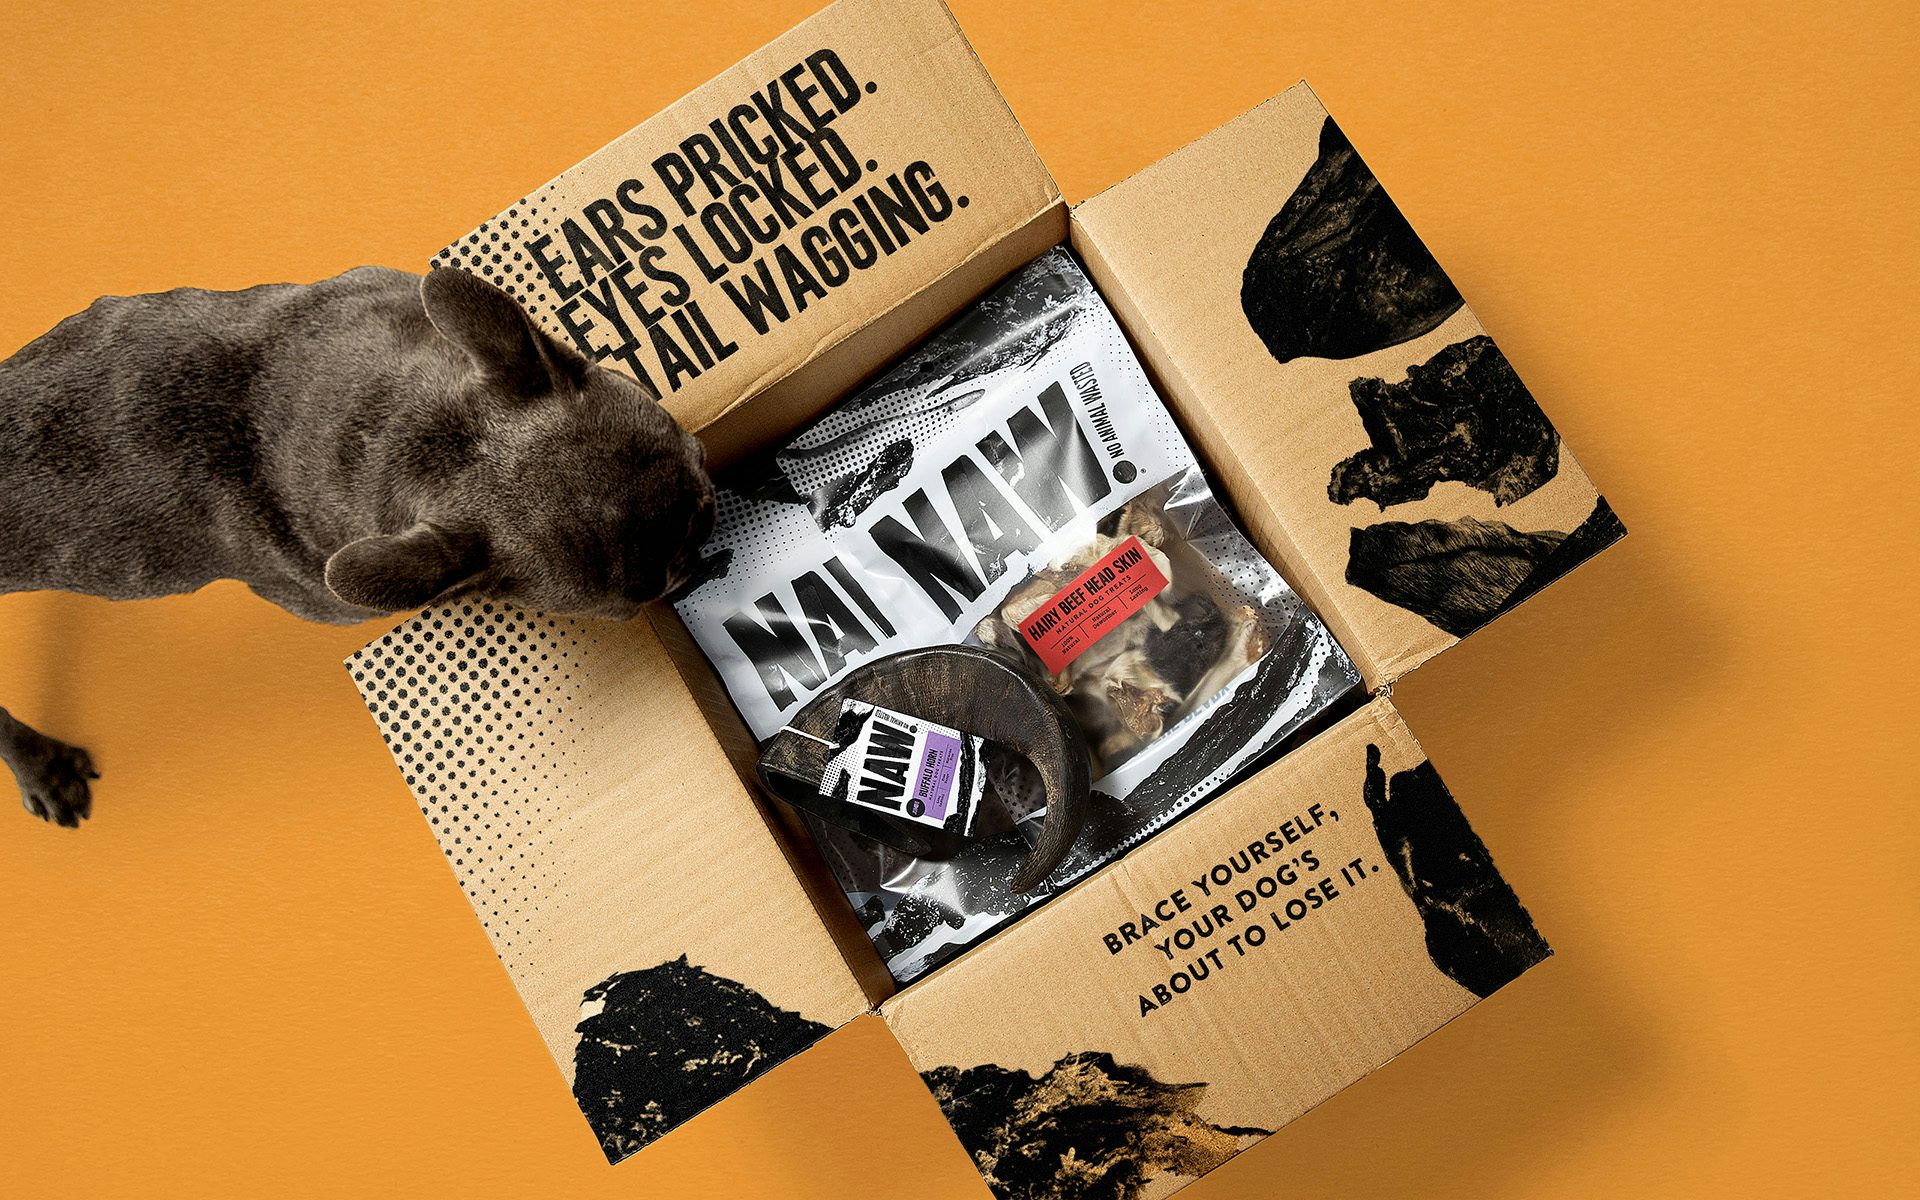 Image shows a packaging box featuring NAW's branding by Robot Food, with a dog inspecting the products inside